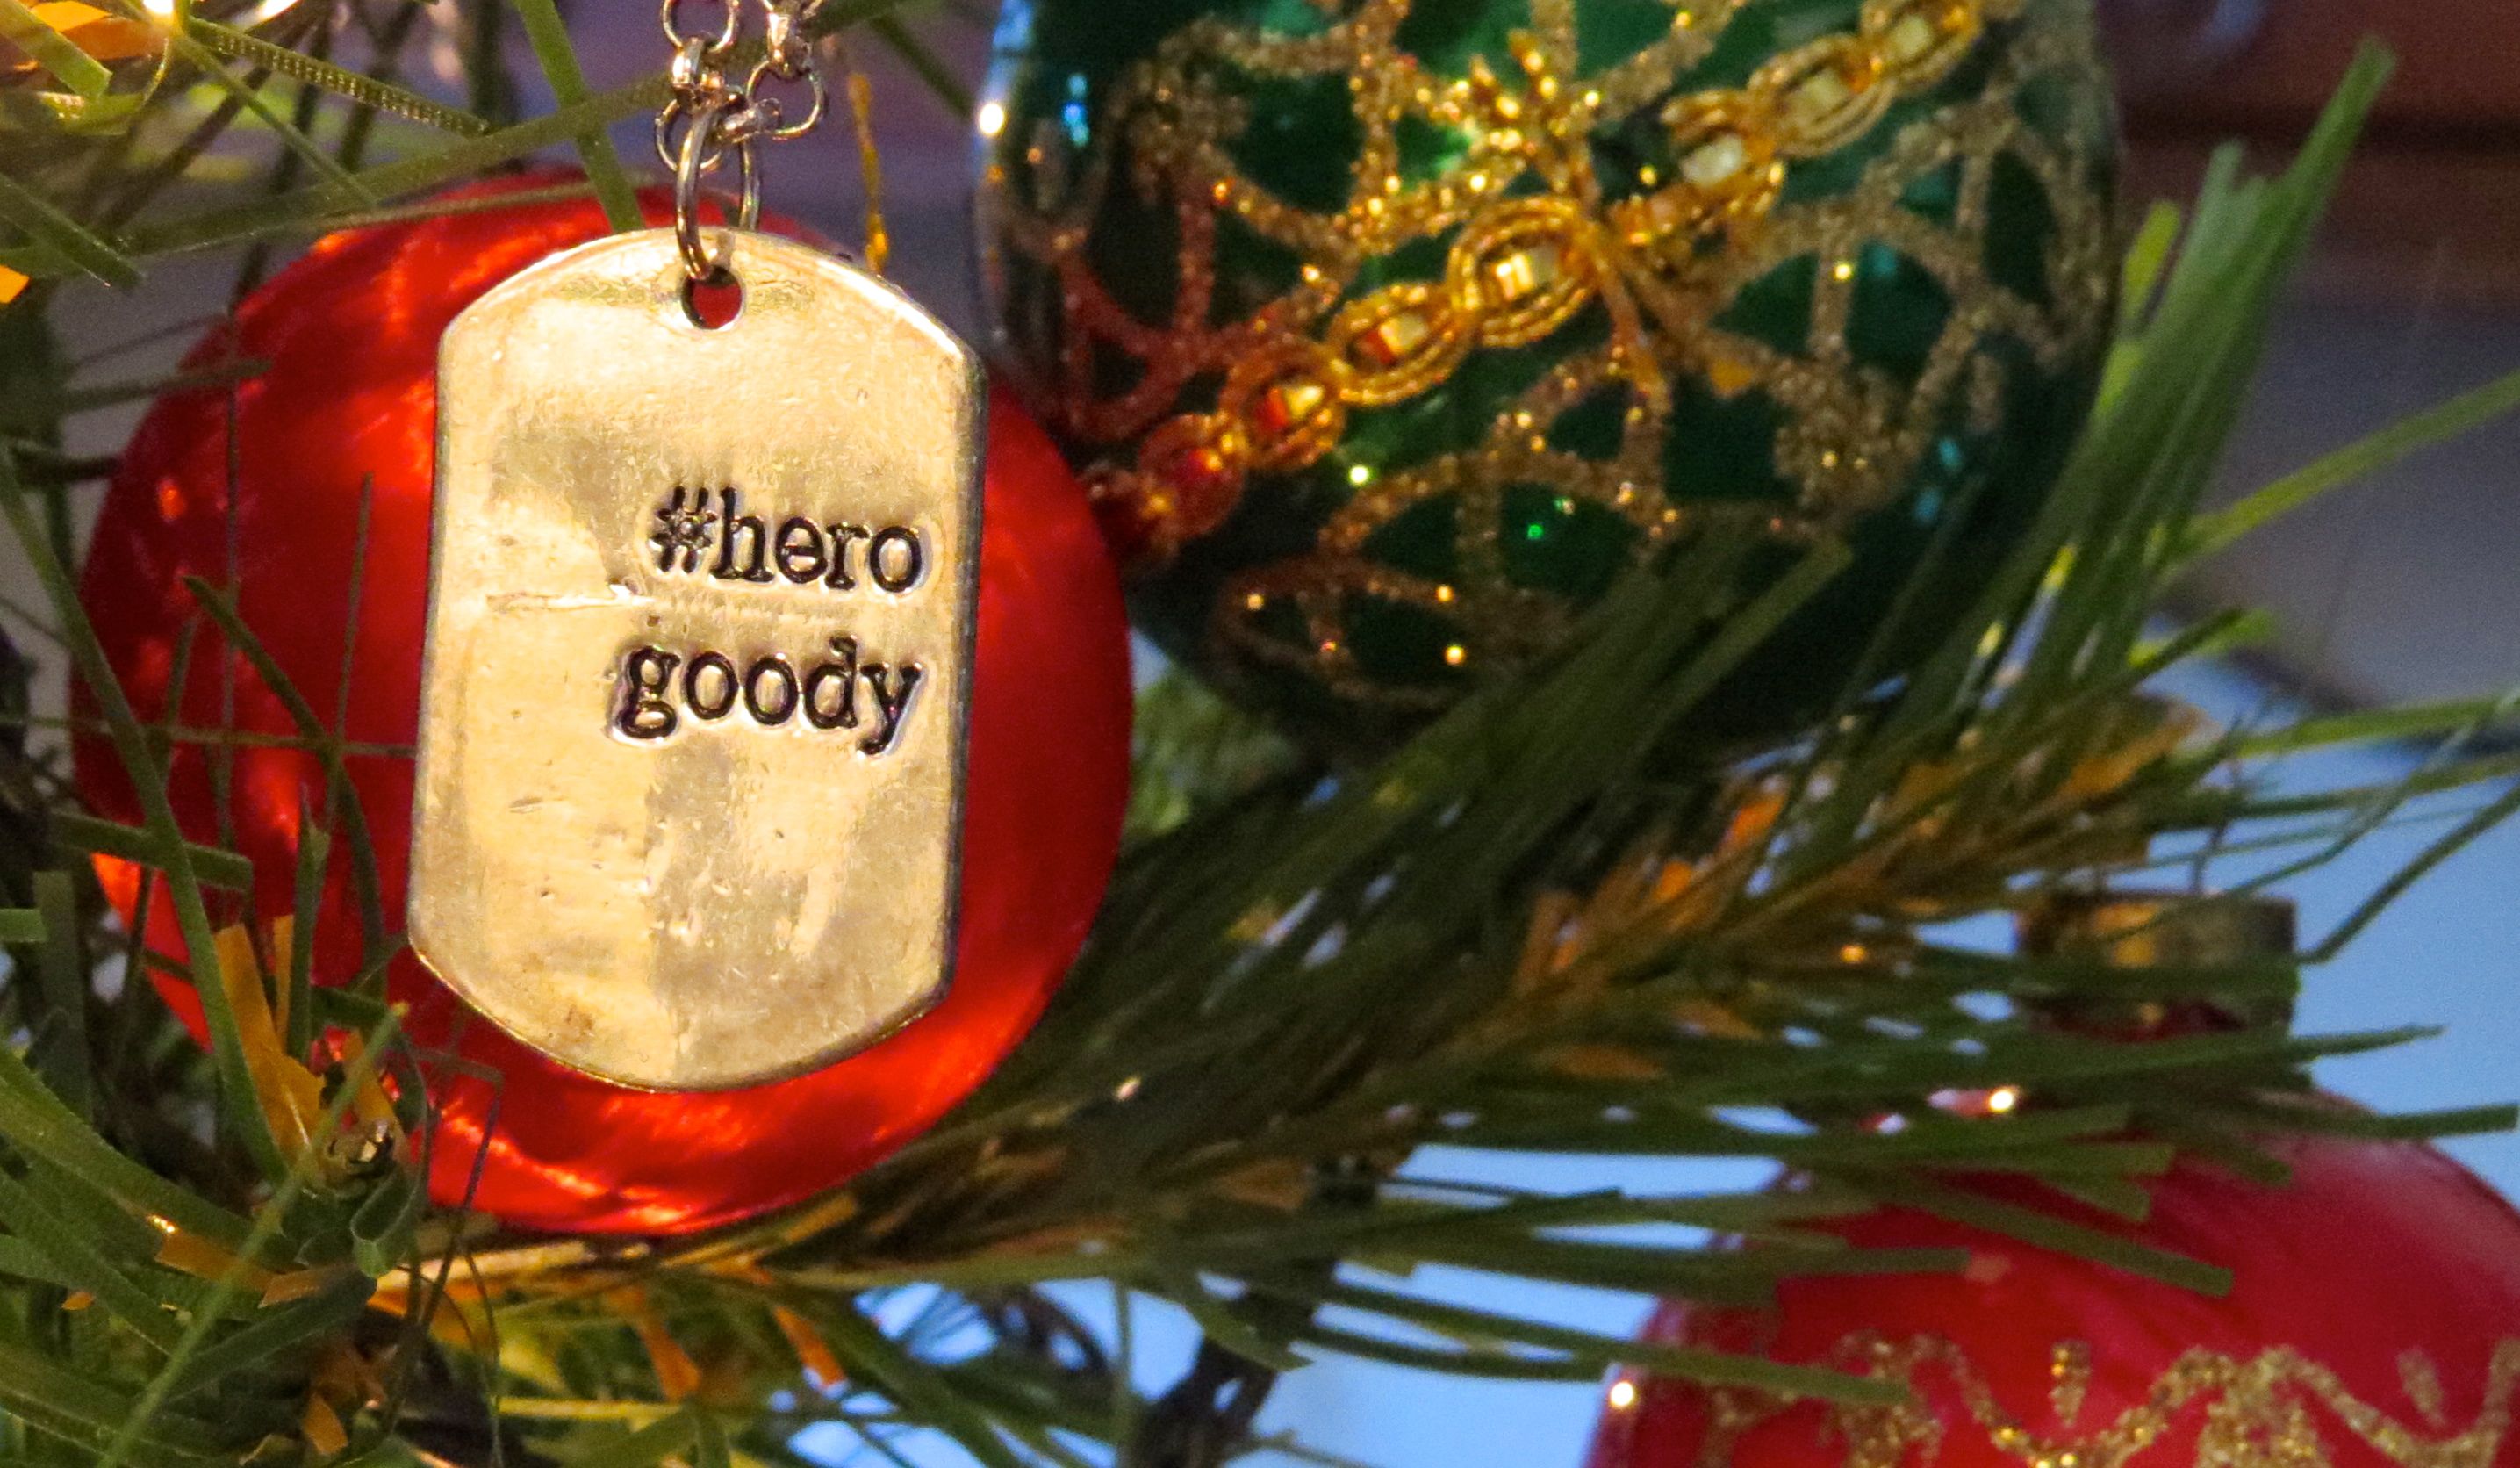 You can tag someone doing with a Hero Goody Necklace